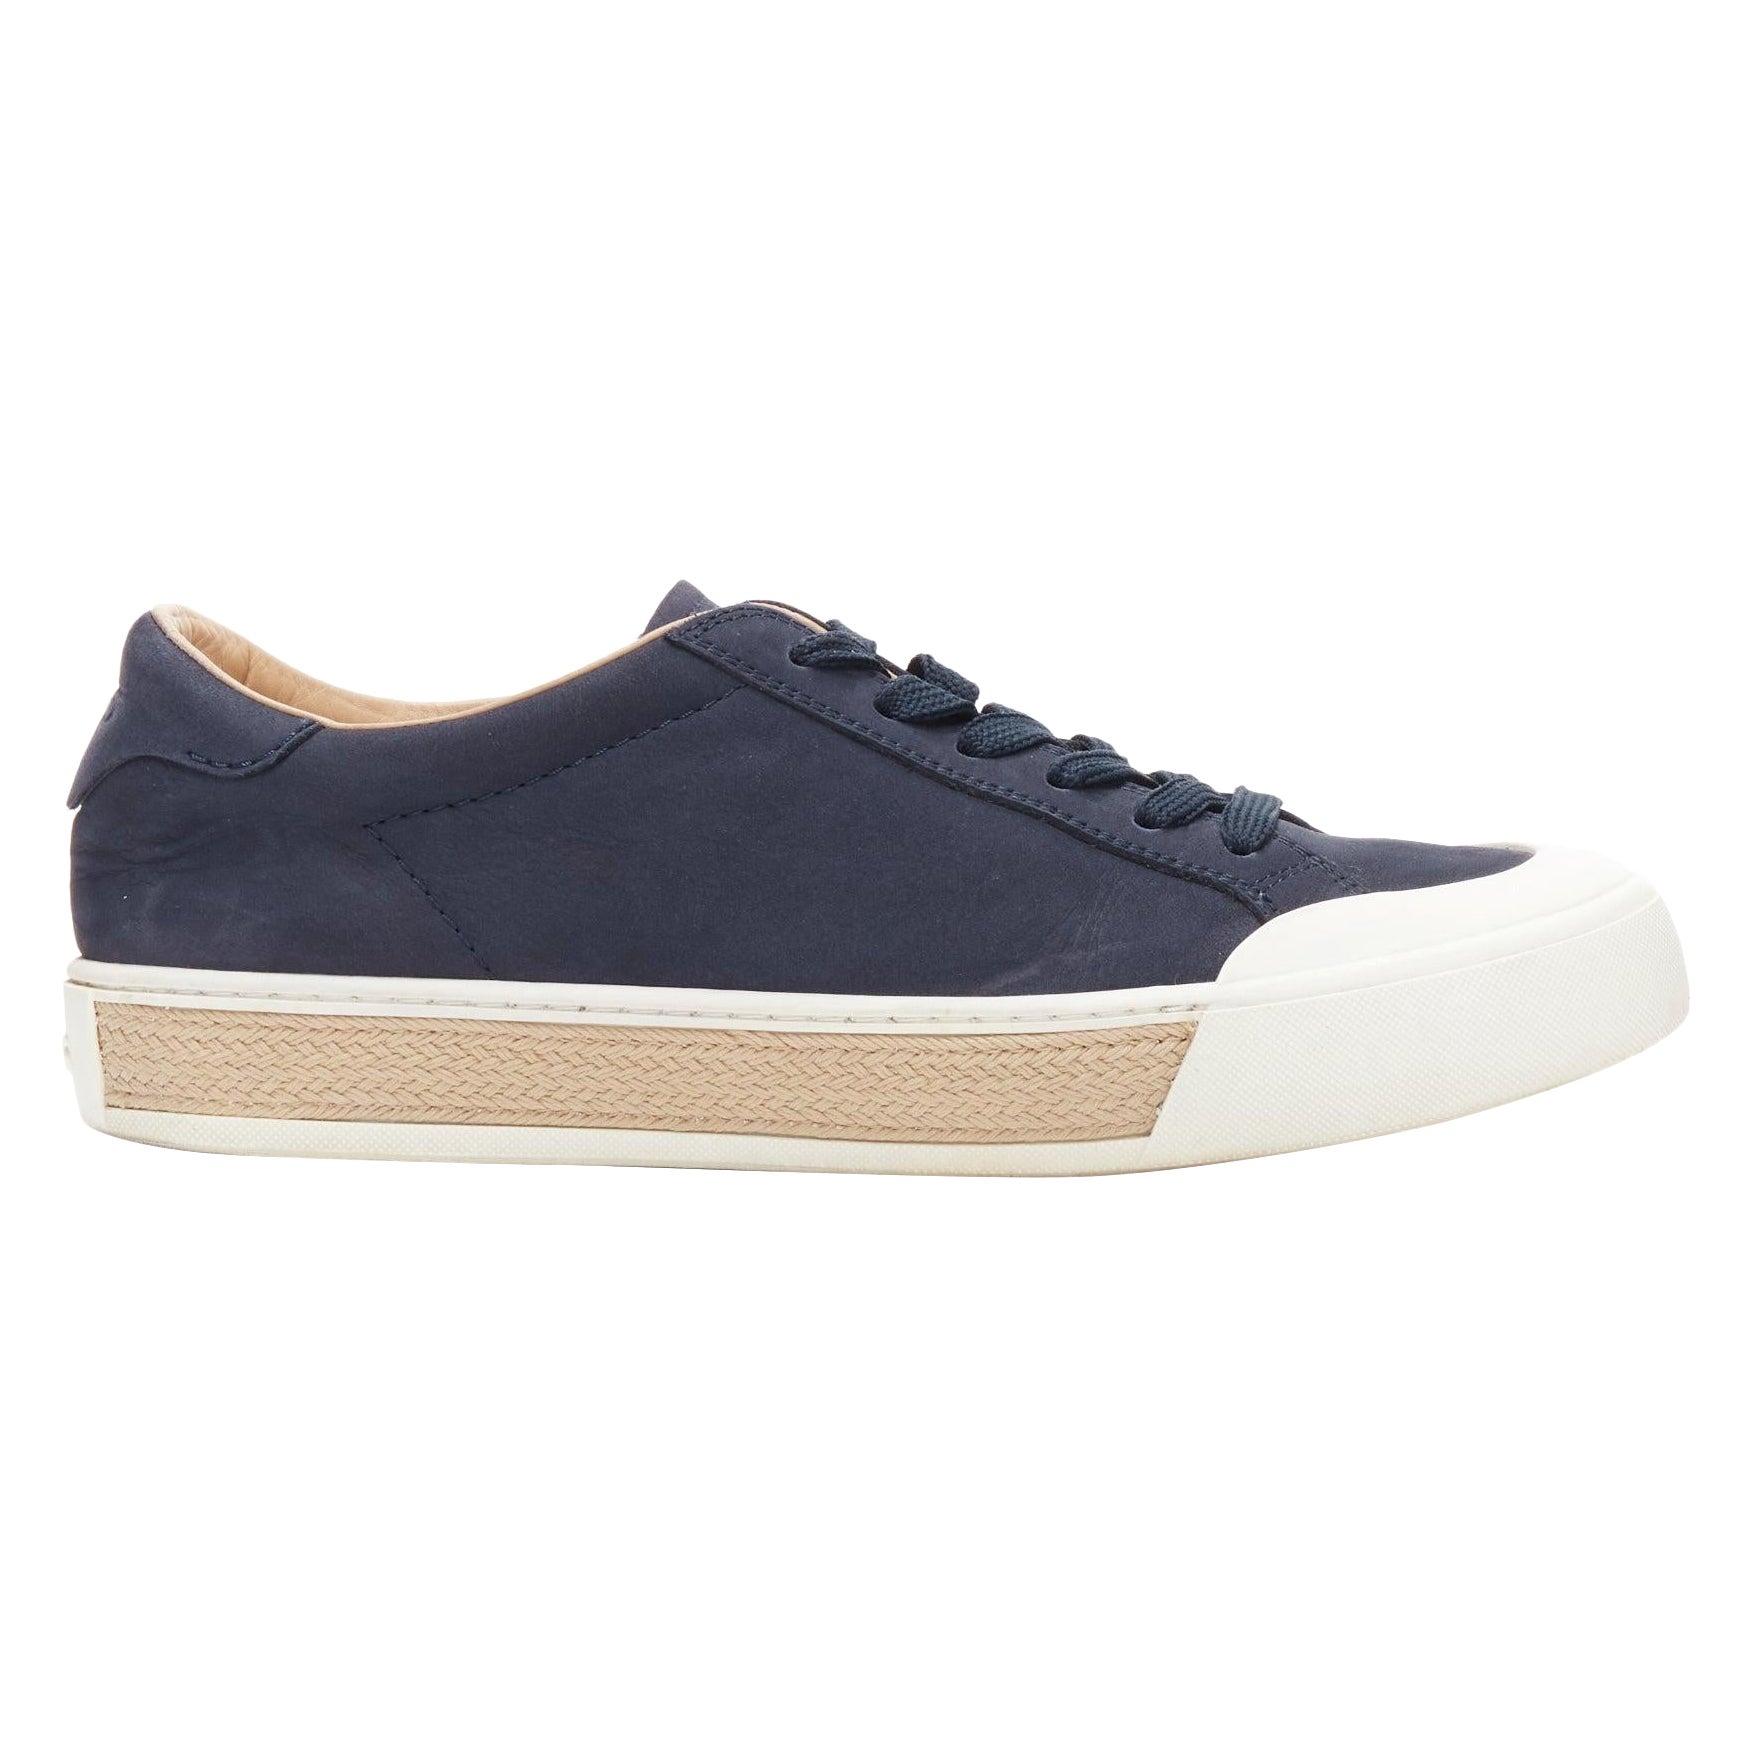 TOD'S navy suede leather espadrille sole low top sneakers UK7.5 EU41.5